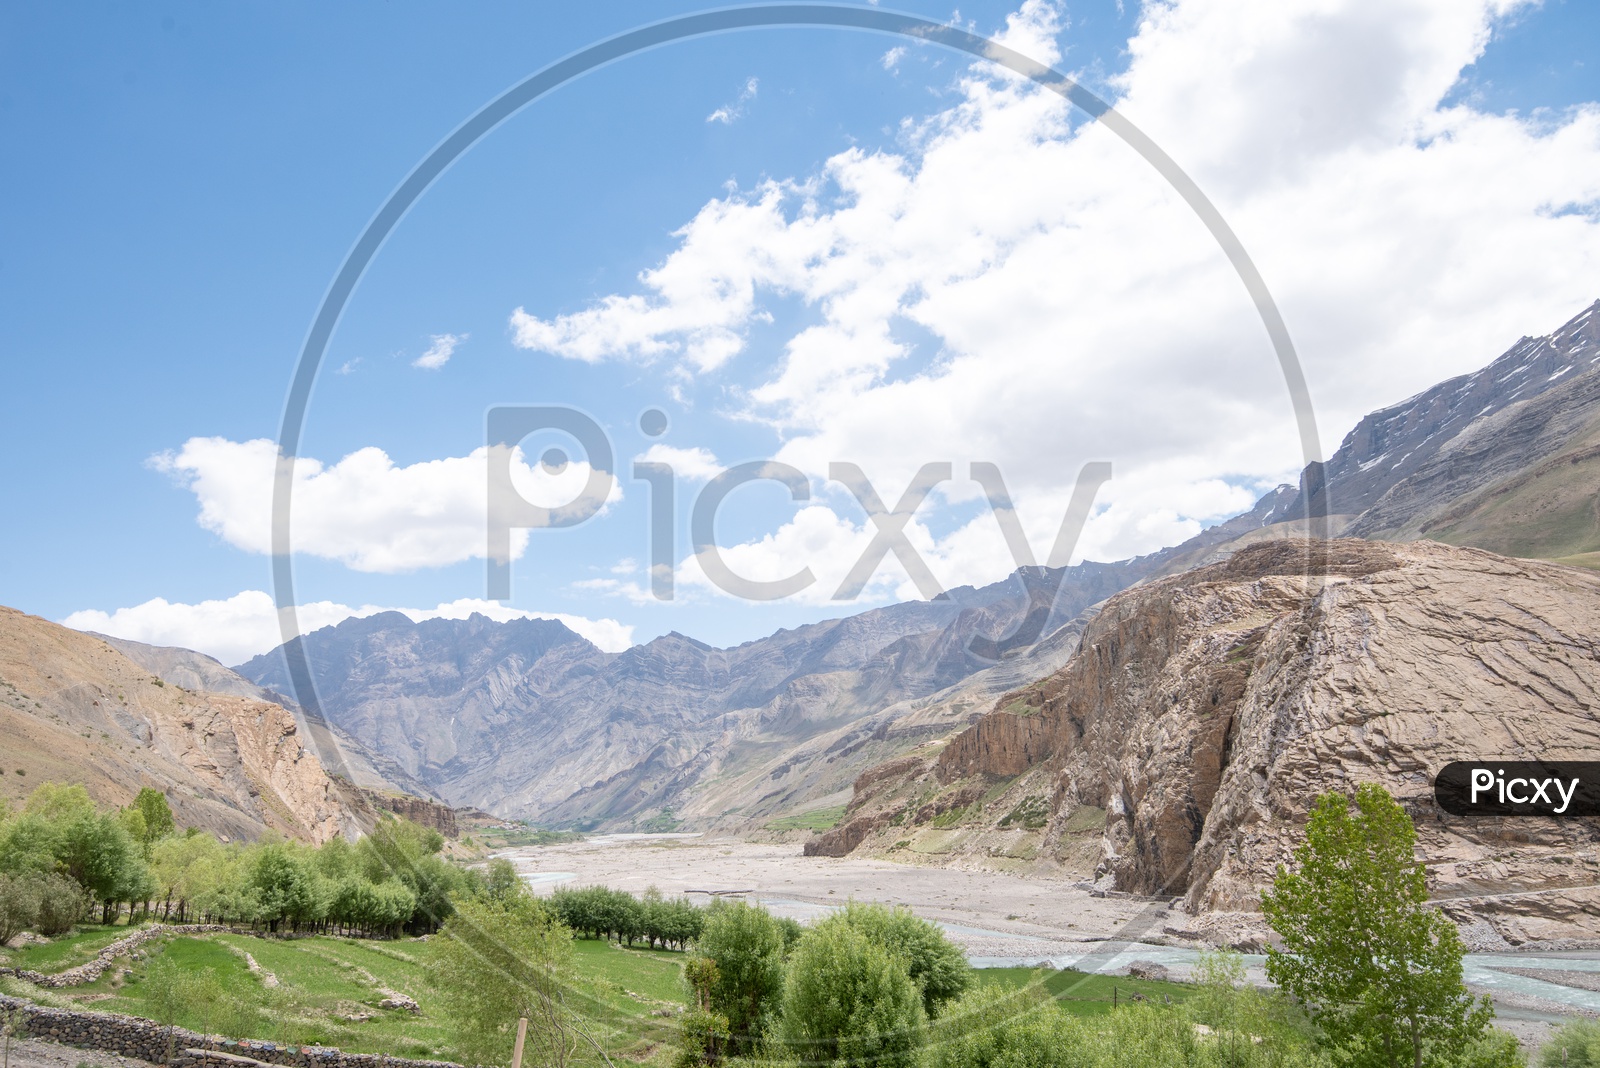 Spiti river with mountains in the background